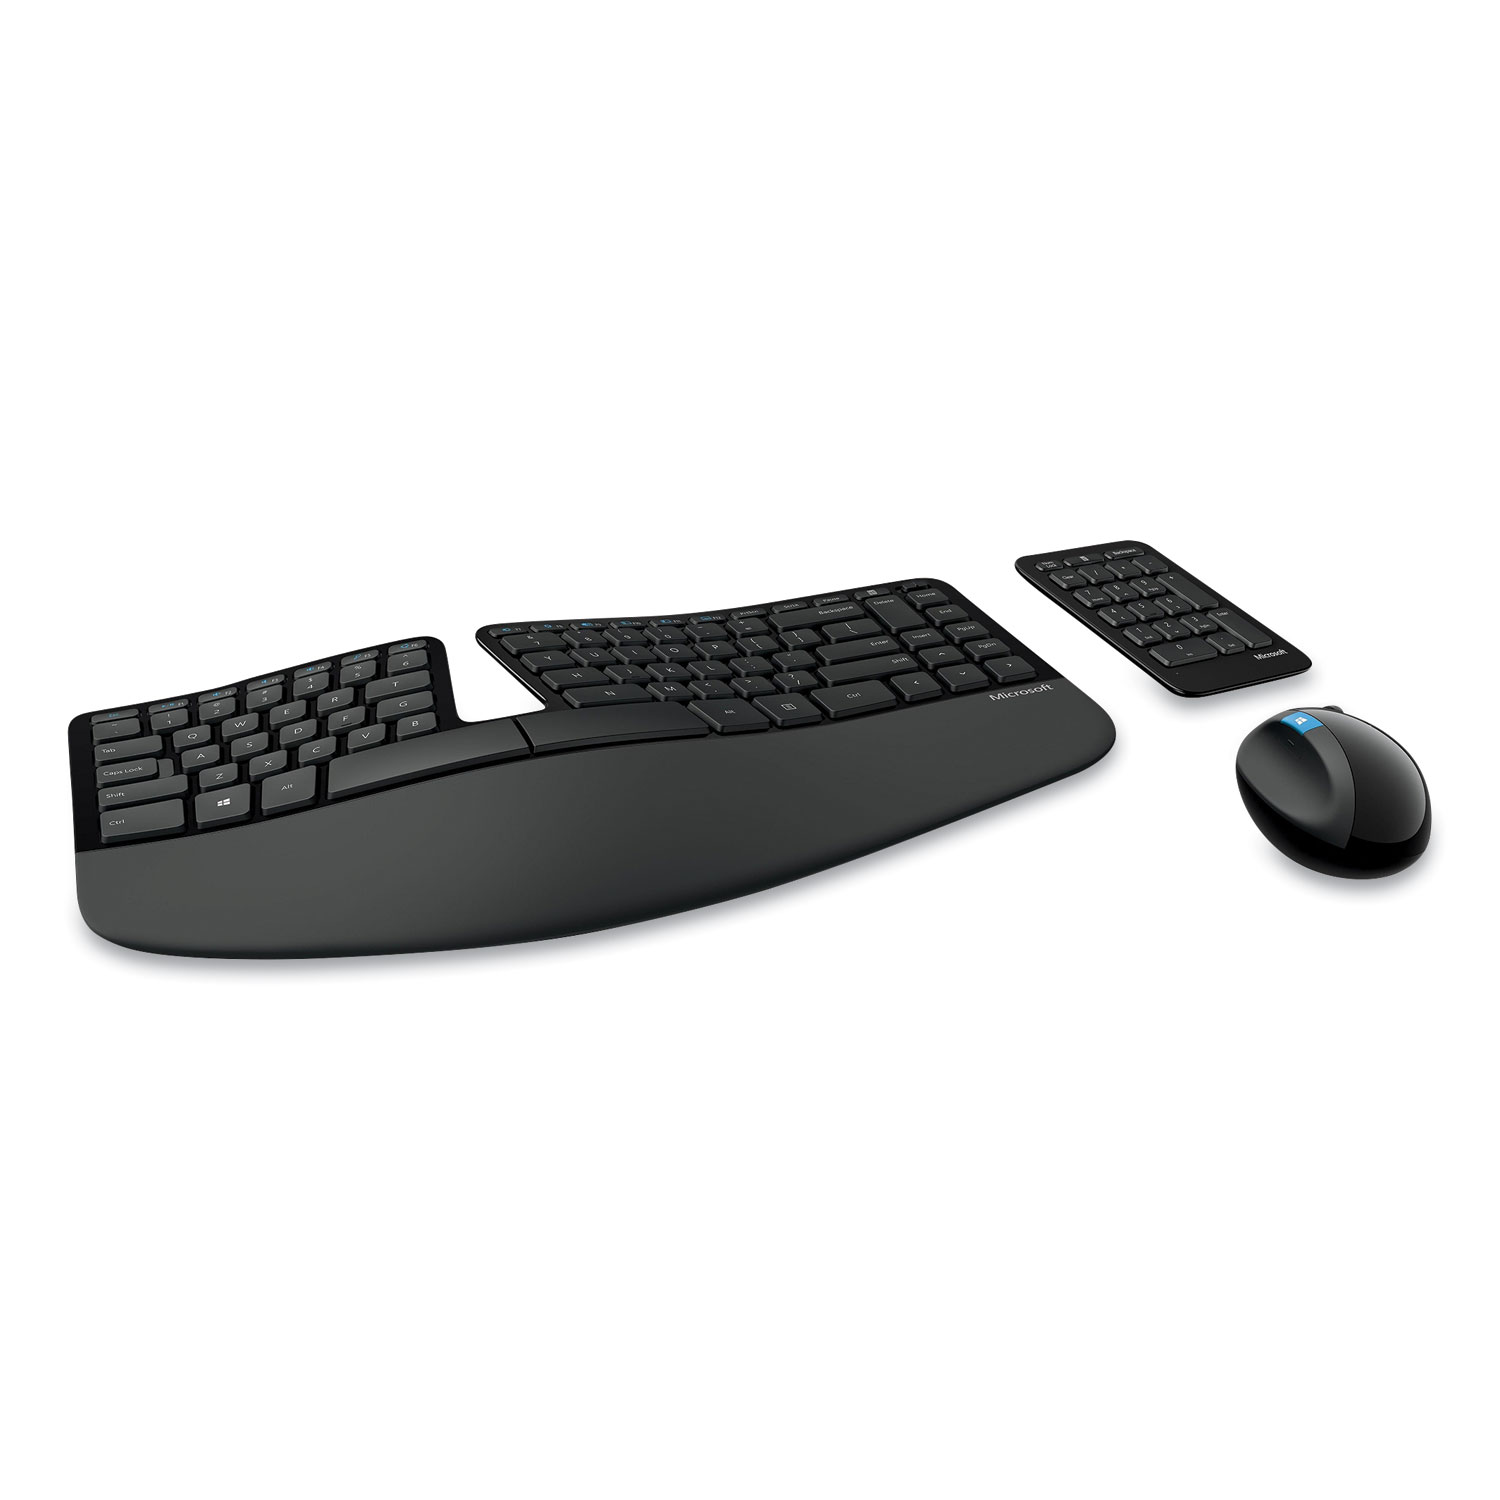  Microsoft L5V-00001 Sculpt Ergonomic Desktop Wireless Keyboard and Mouse Combo, 2.4 GHz Frequency, Black (MSF206709) 